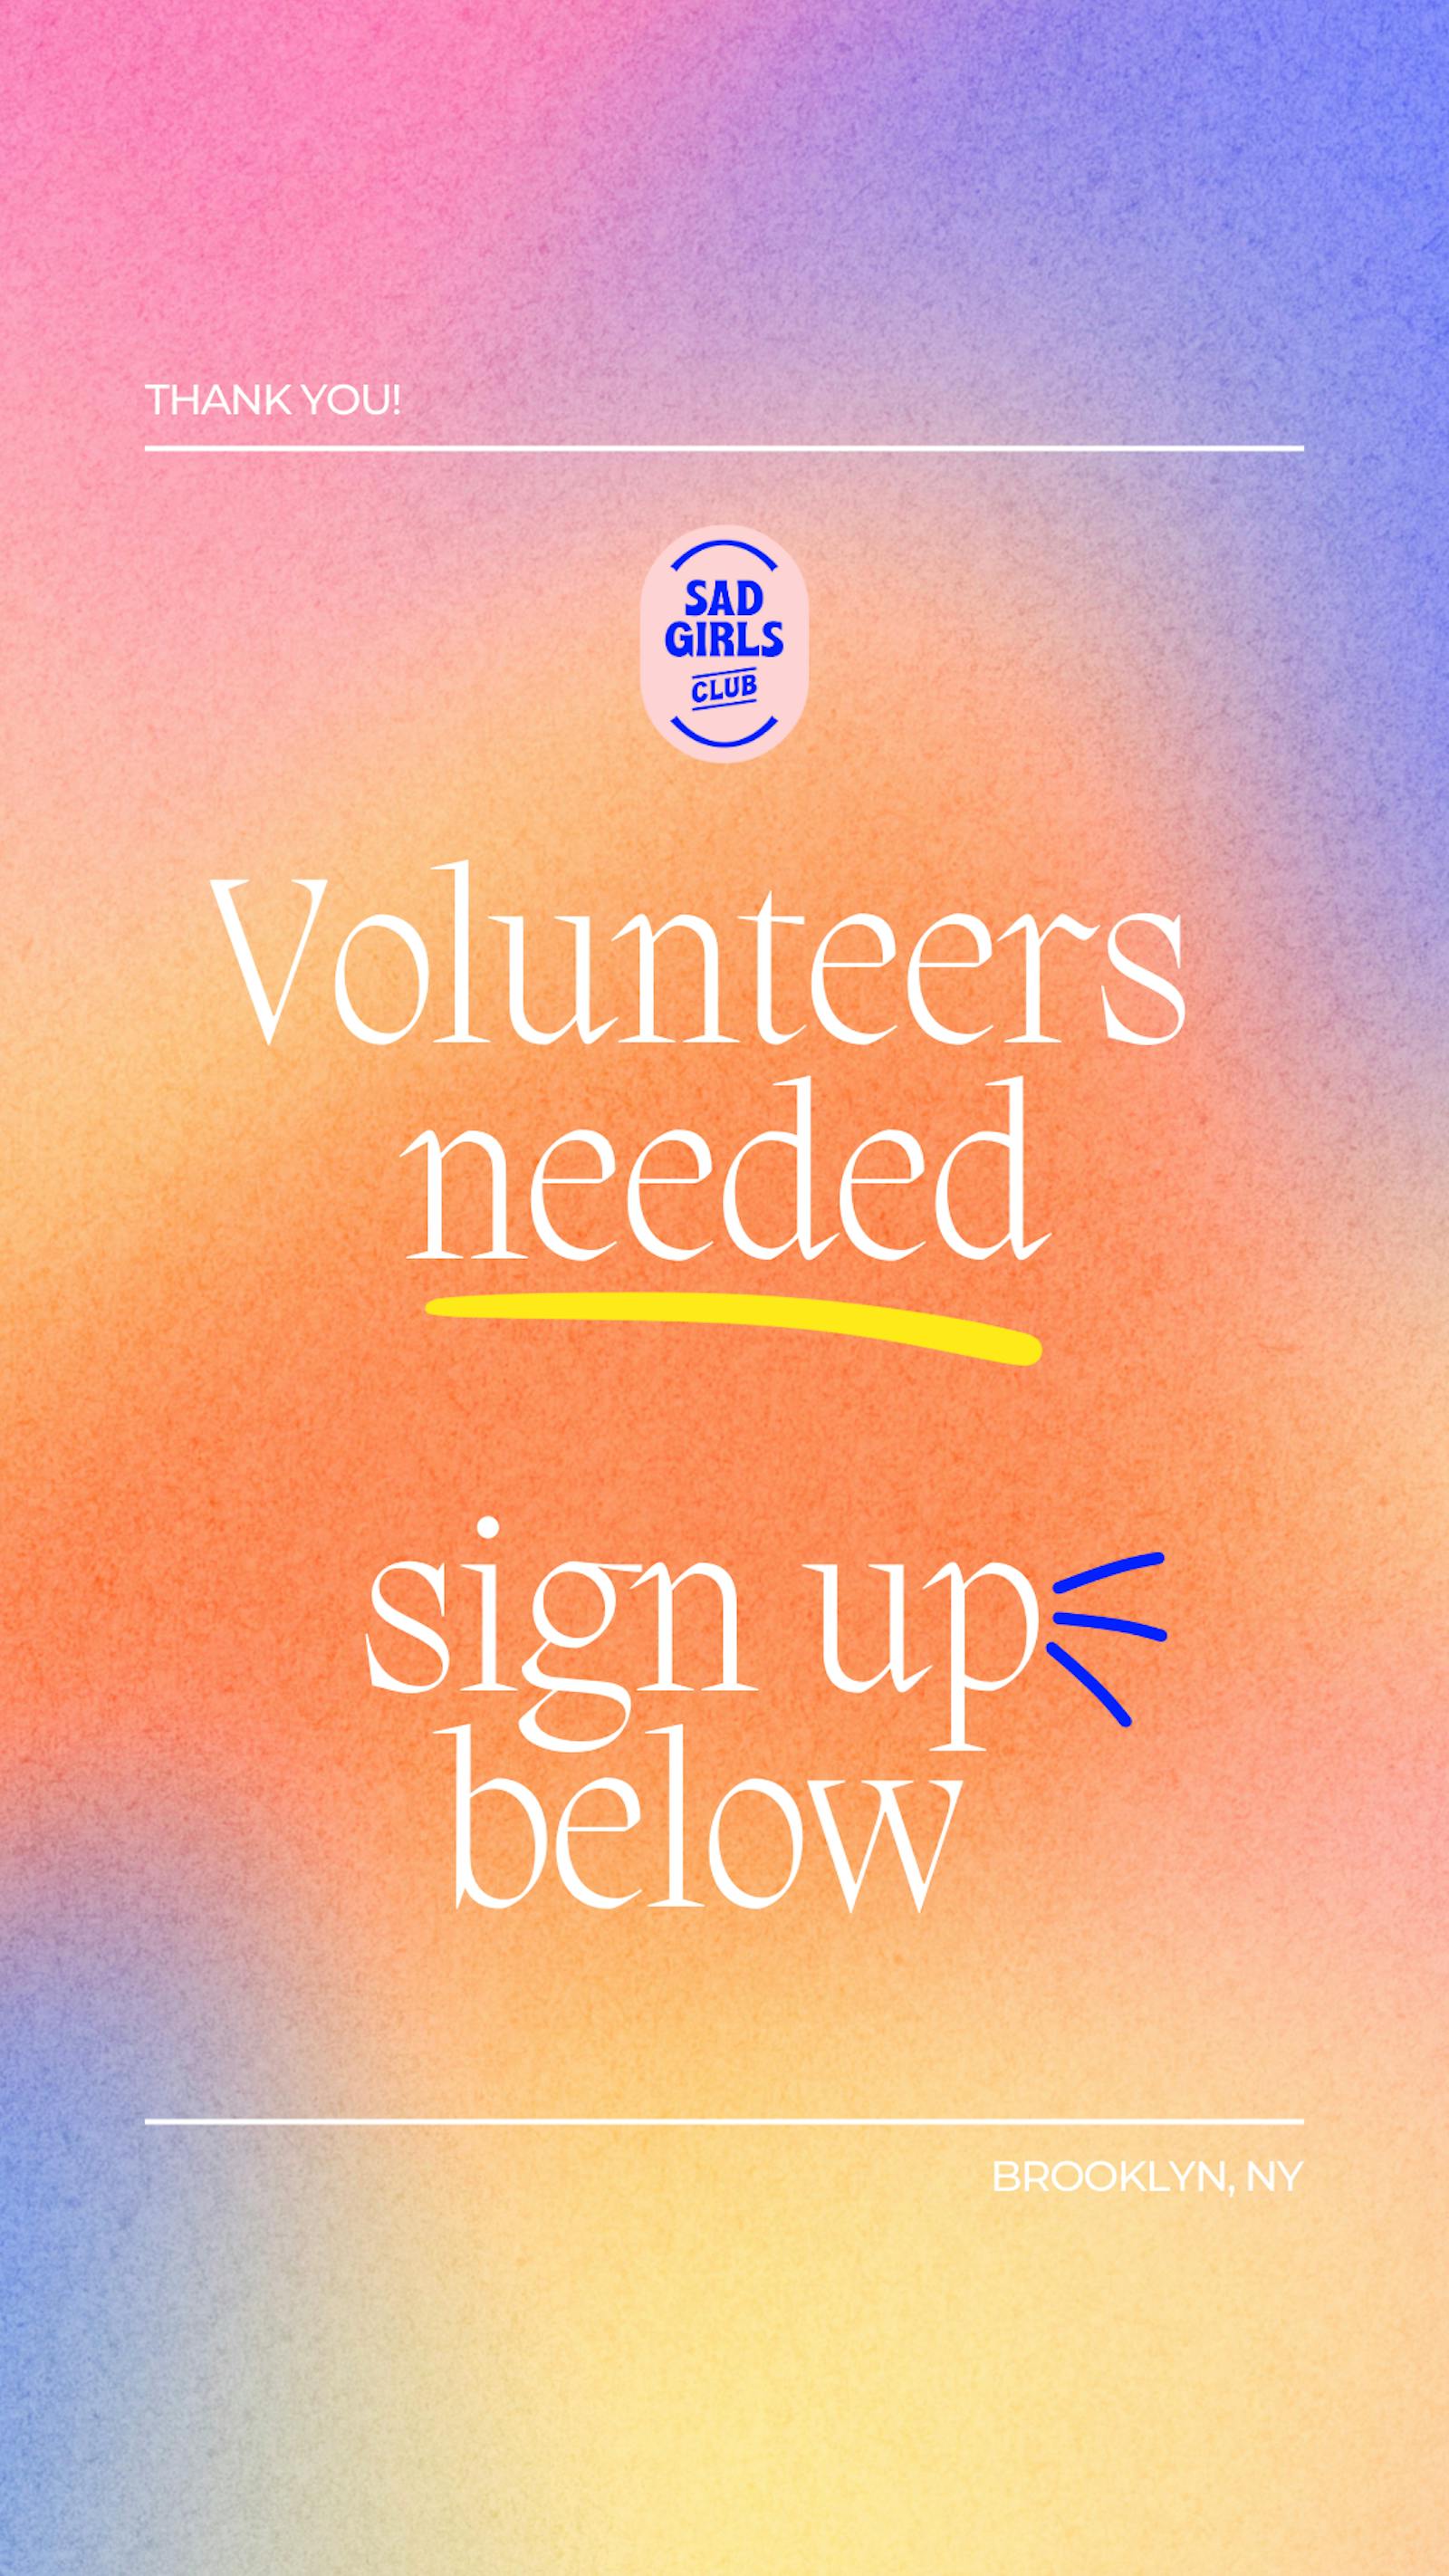 Volunteer with the Club!